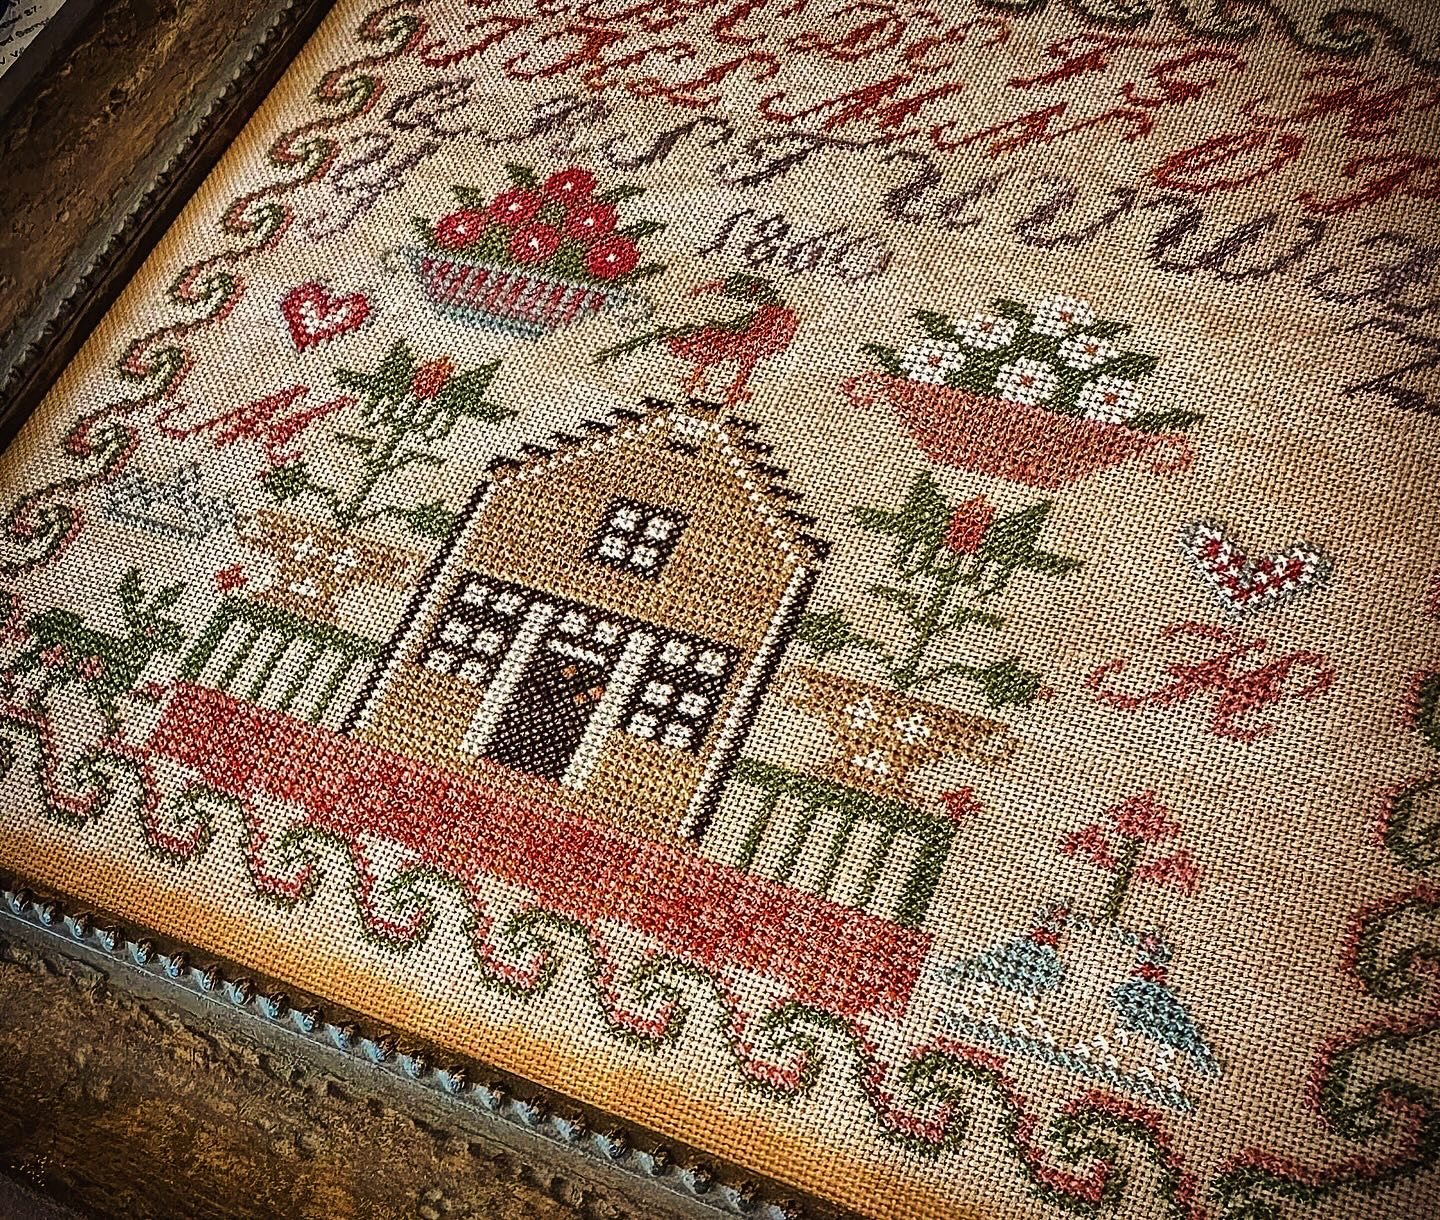 MH 1860 - Reproduction Sampler Chart by Needlework Press